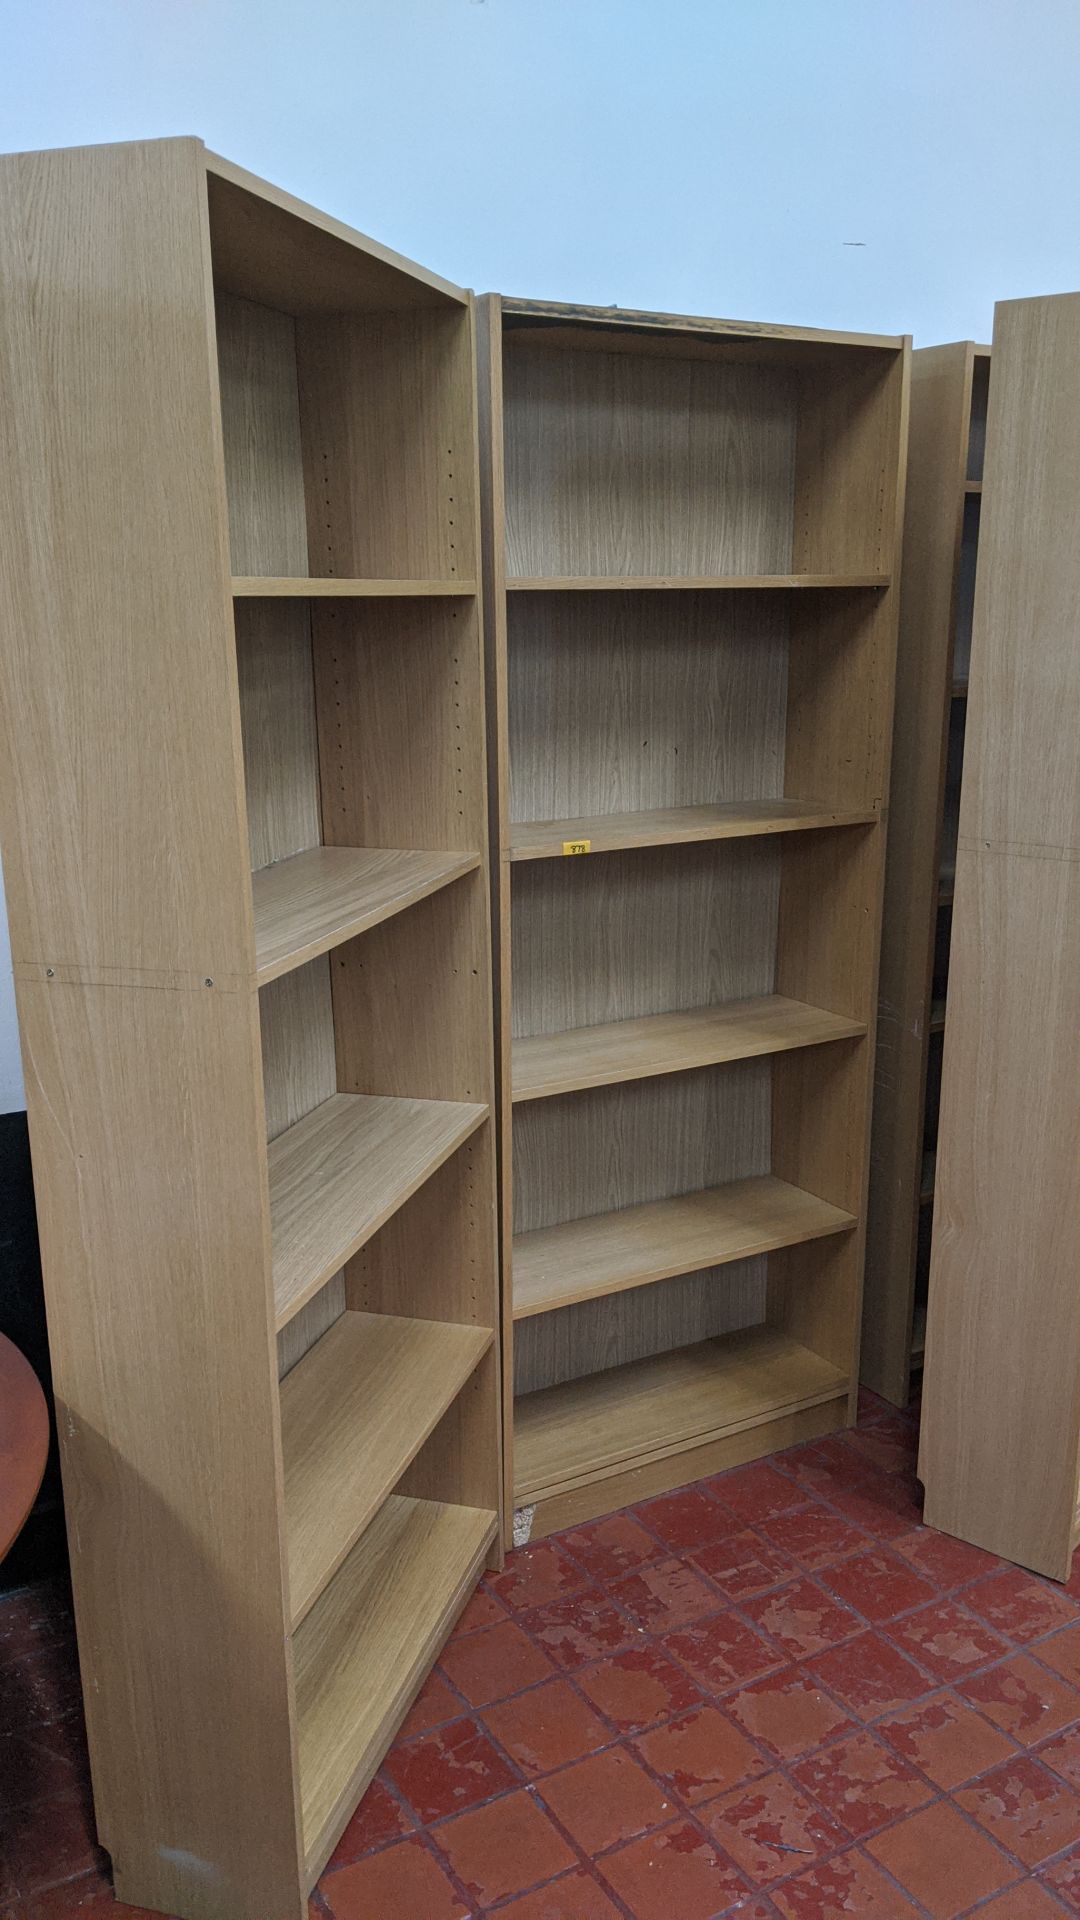 2 off tall wooden open front bookcases. This is one of a large number of lots in this sale being